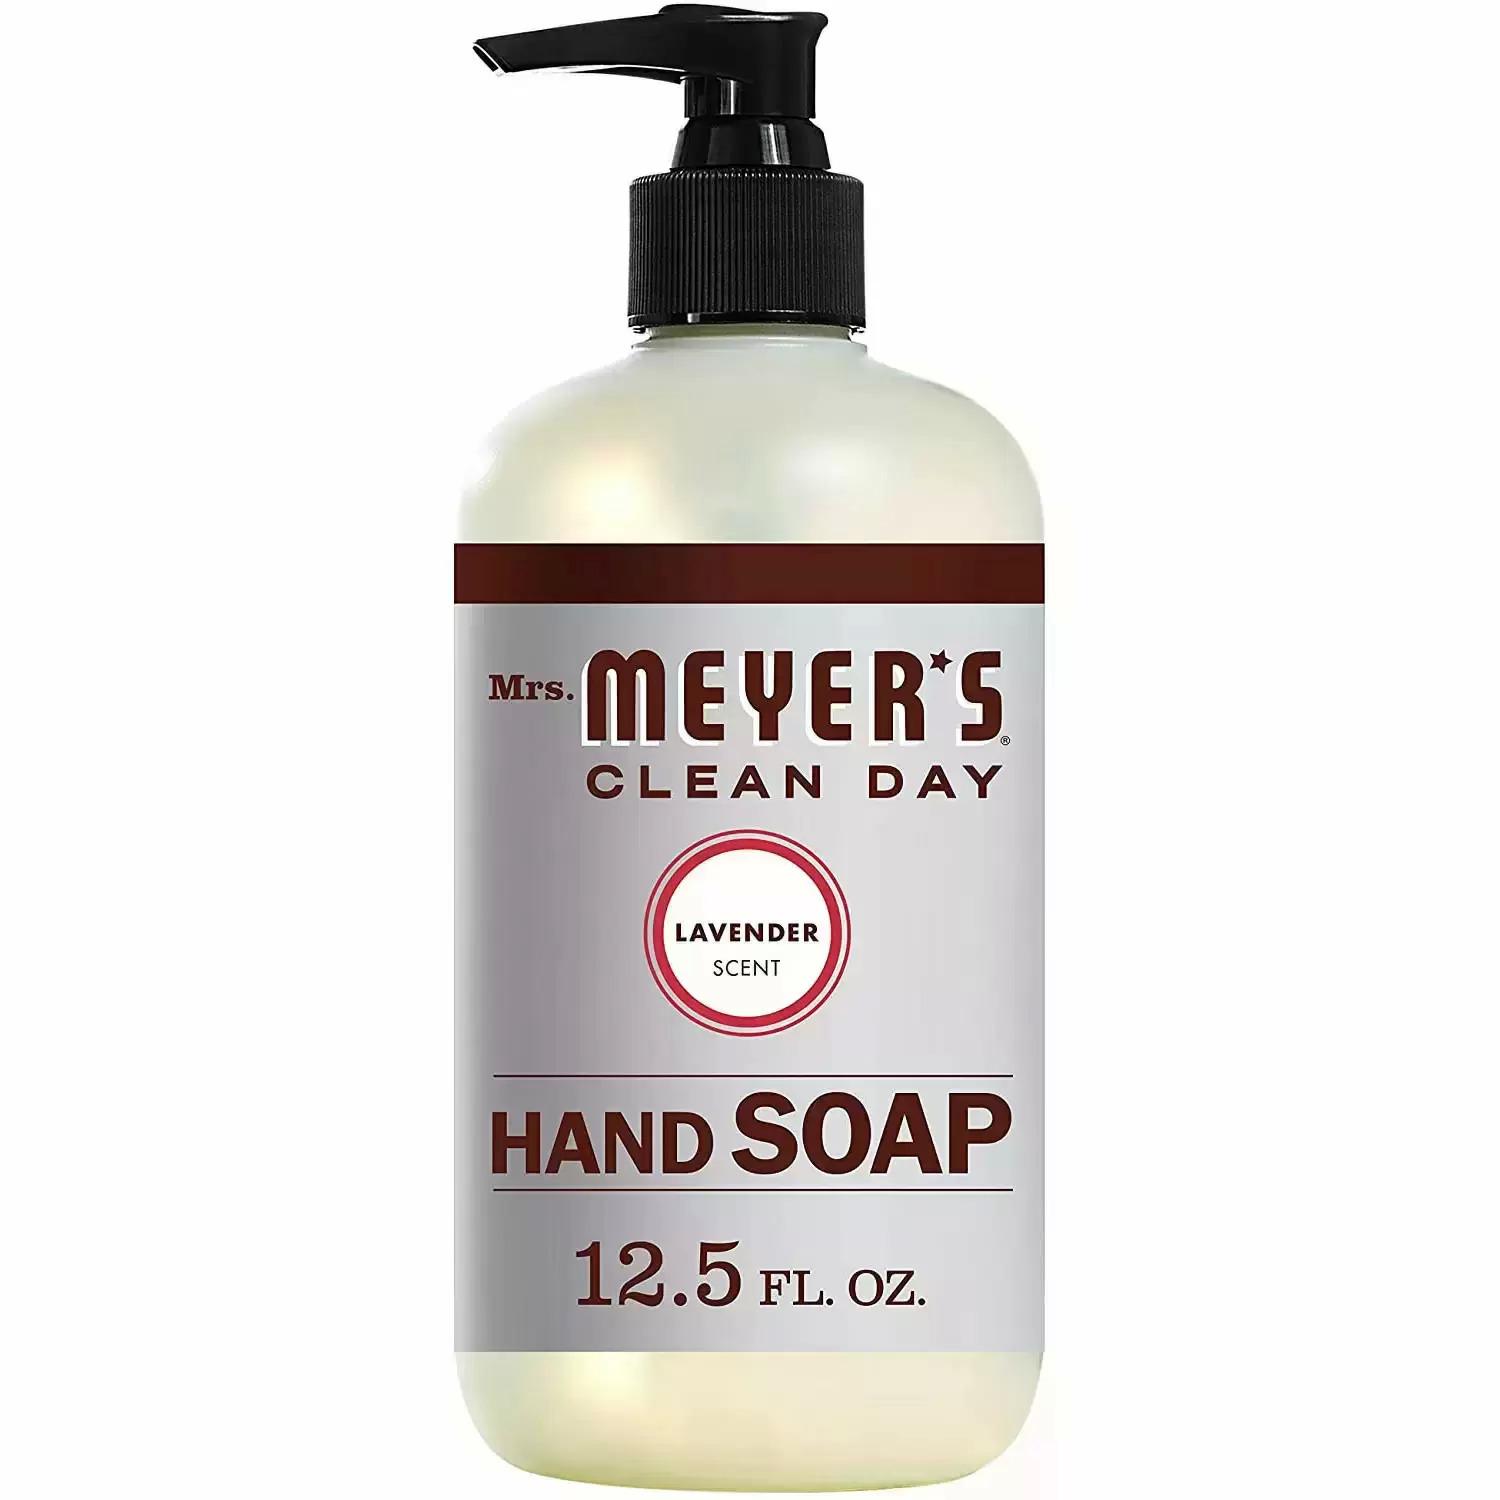 Mrs Meyers Clean Day Lavender Liquid Hand Soap for $2.86 Shipped